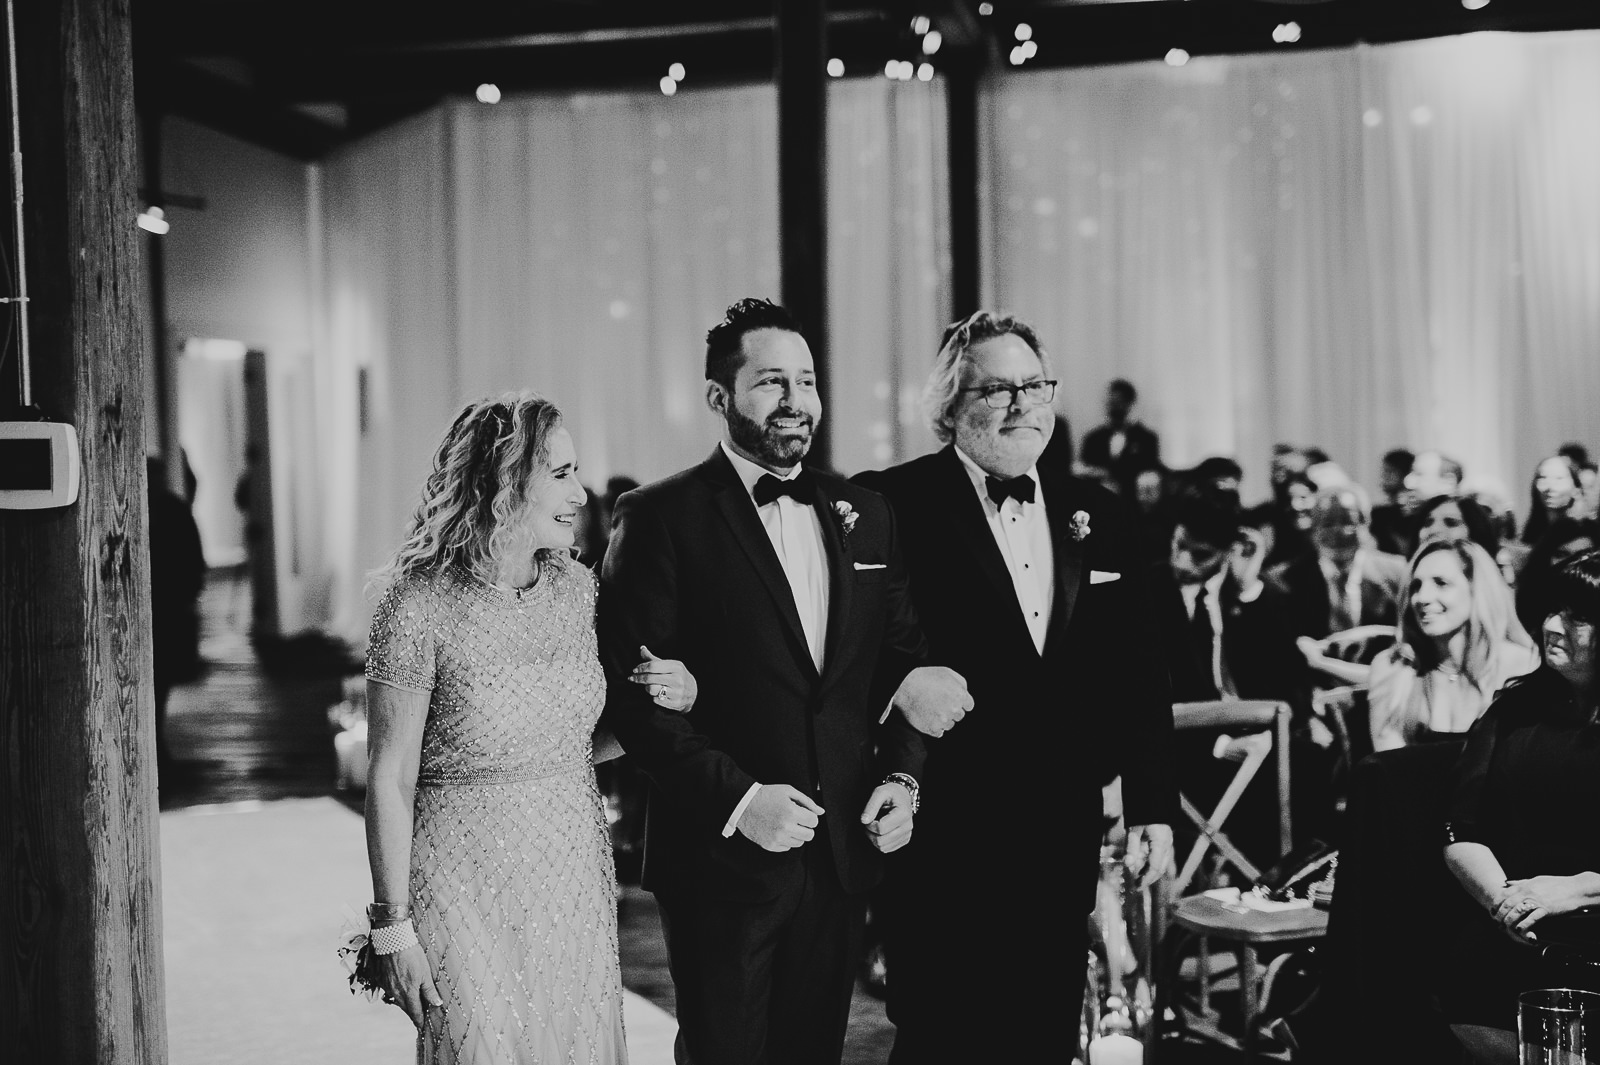 38 groom at gallery 1028 - Chicago Wedding Photography at Gallery 1028 // Courtnie + David